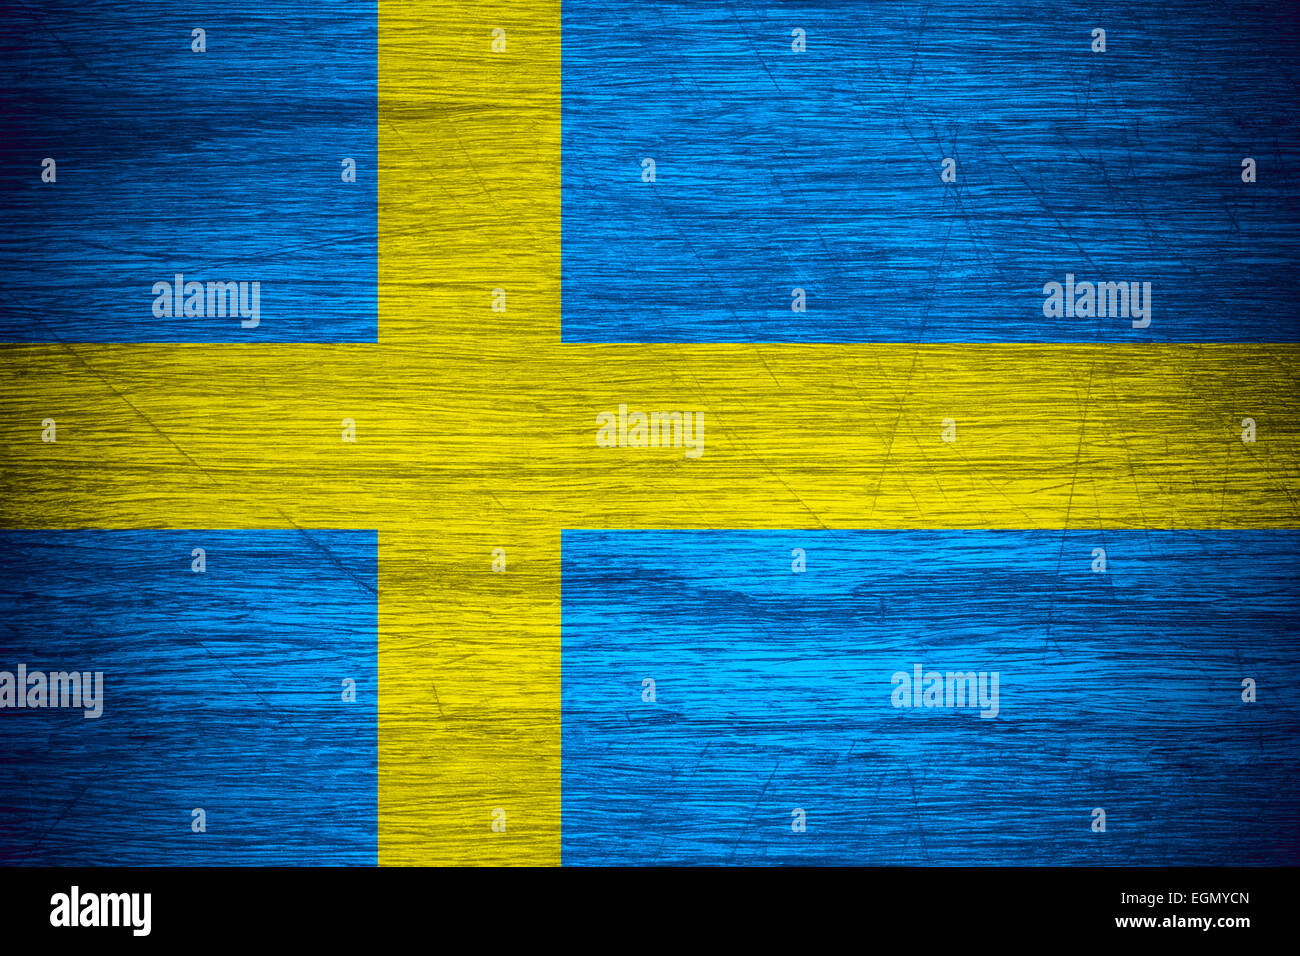 Sweden flag or Swedish banner on wooden texture Stock Photo